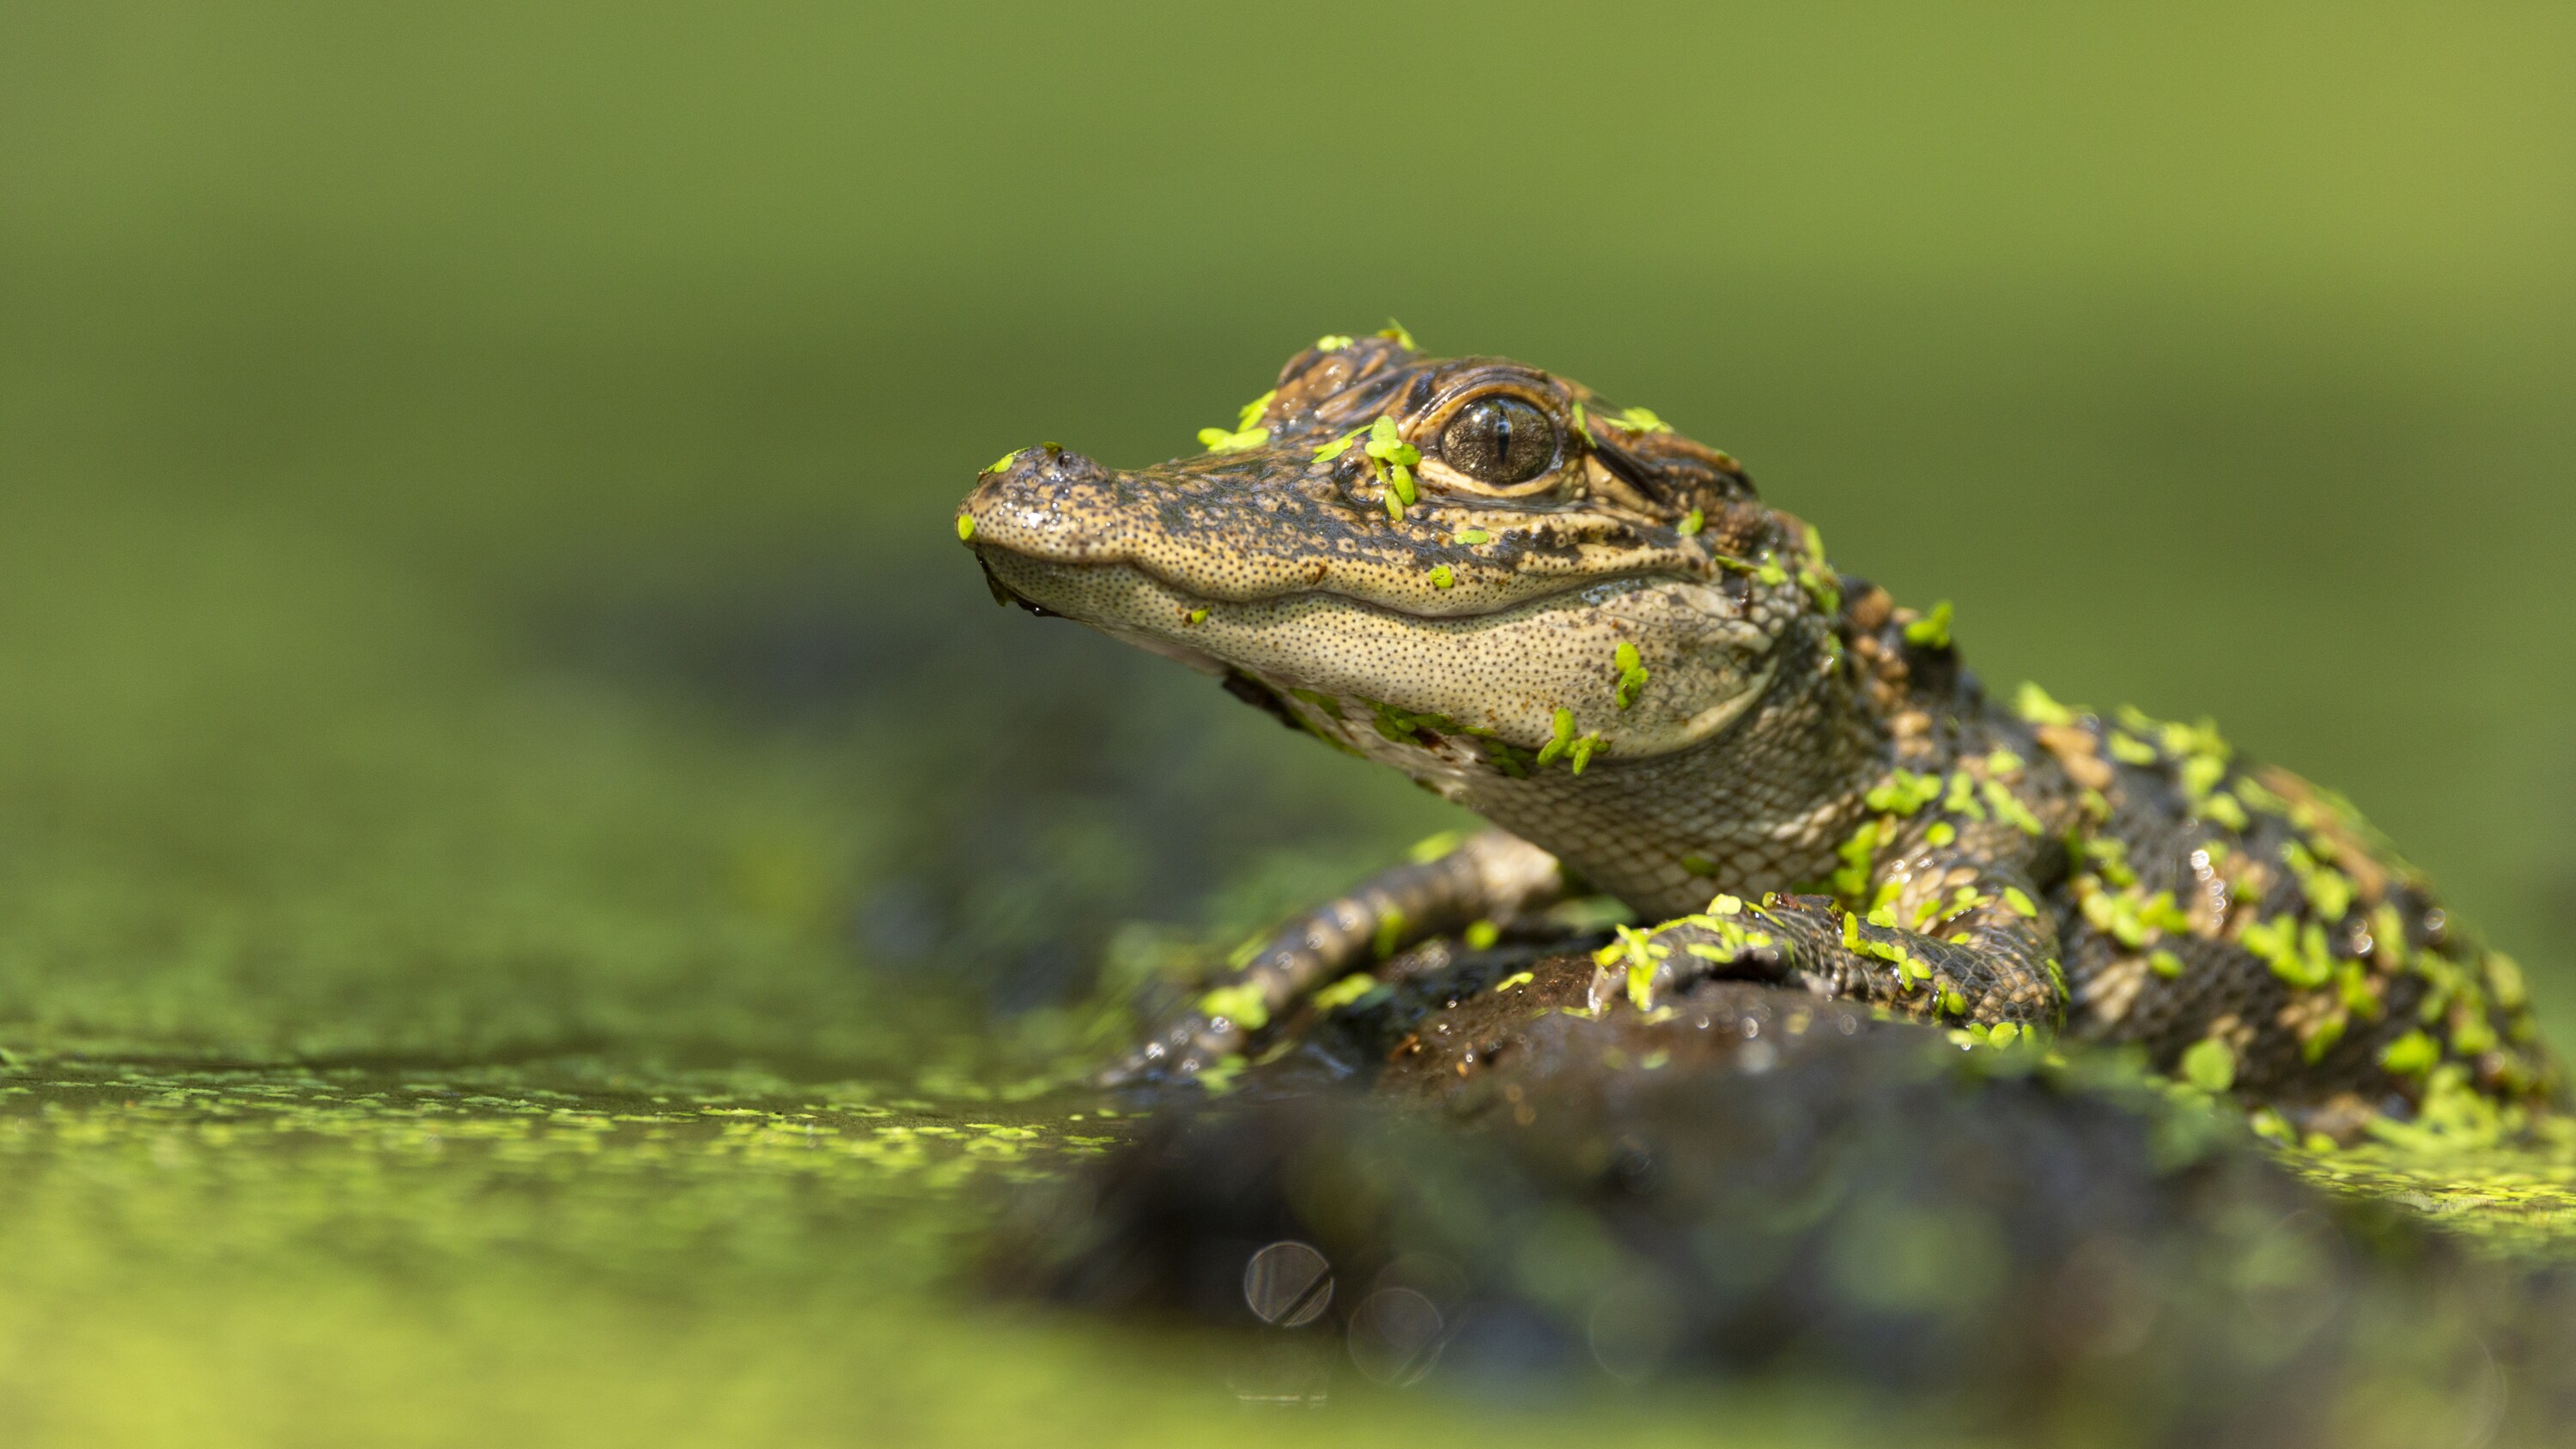 An alligator hatchling basking in the Southern swamps. (National Geographic for Disney+/Austin Ferguson)